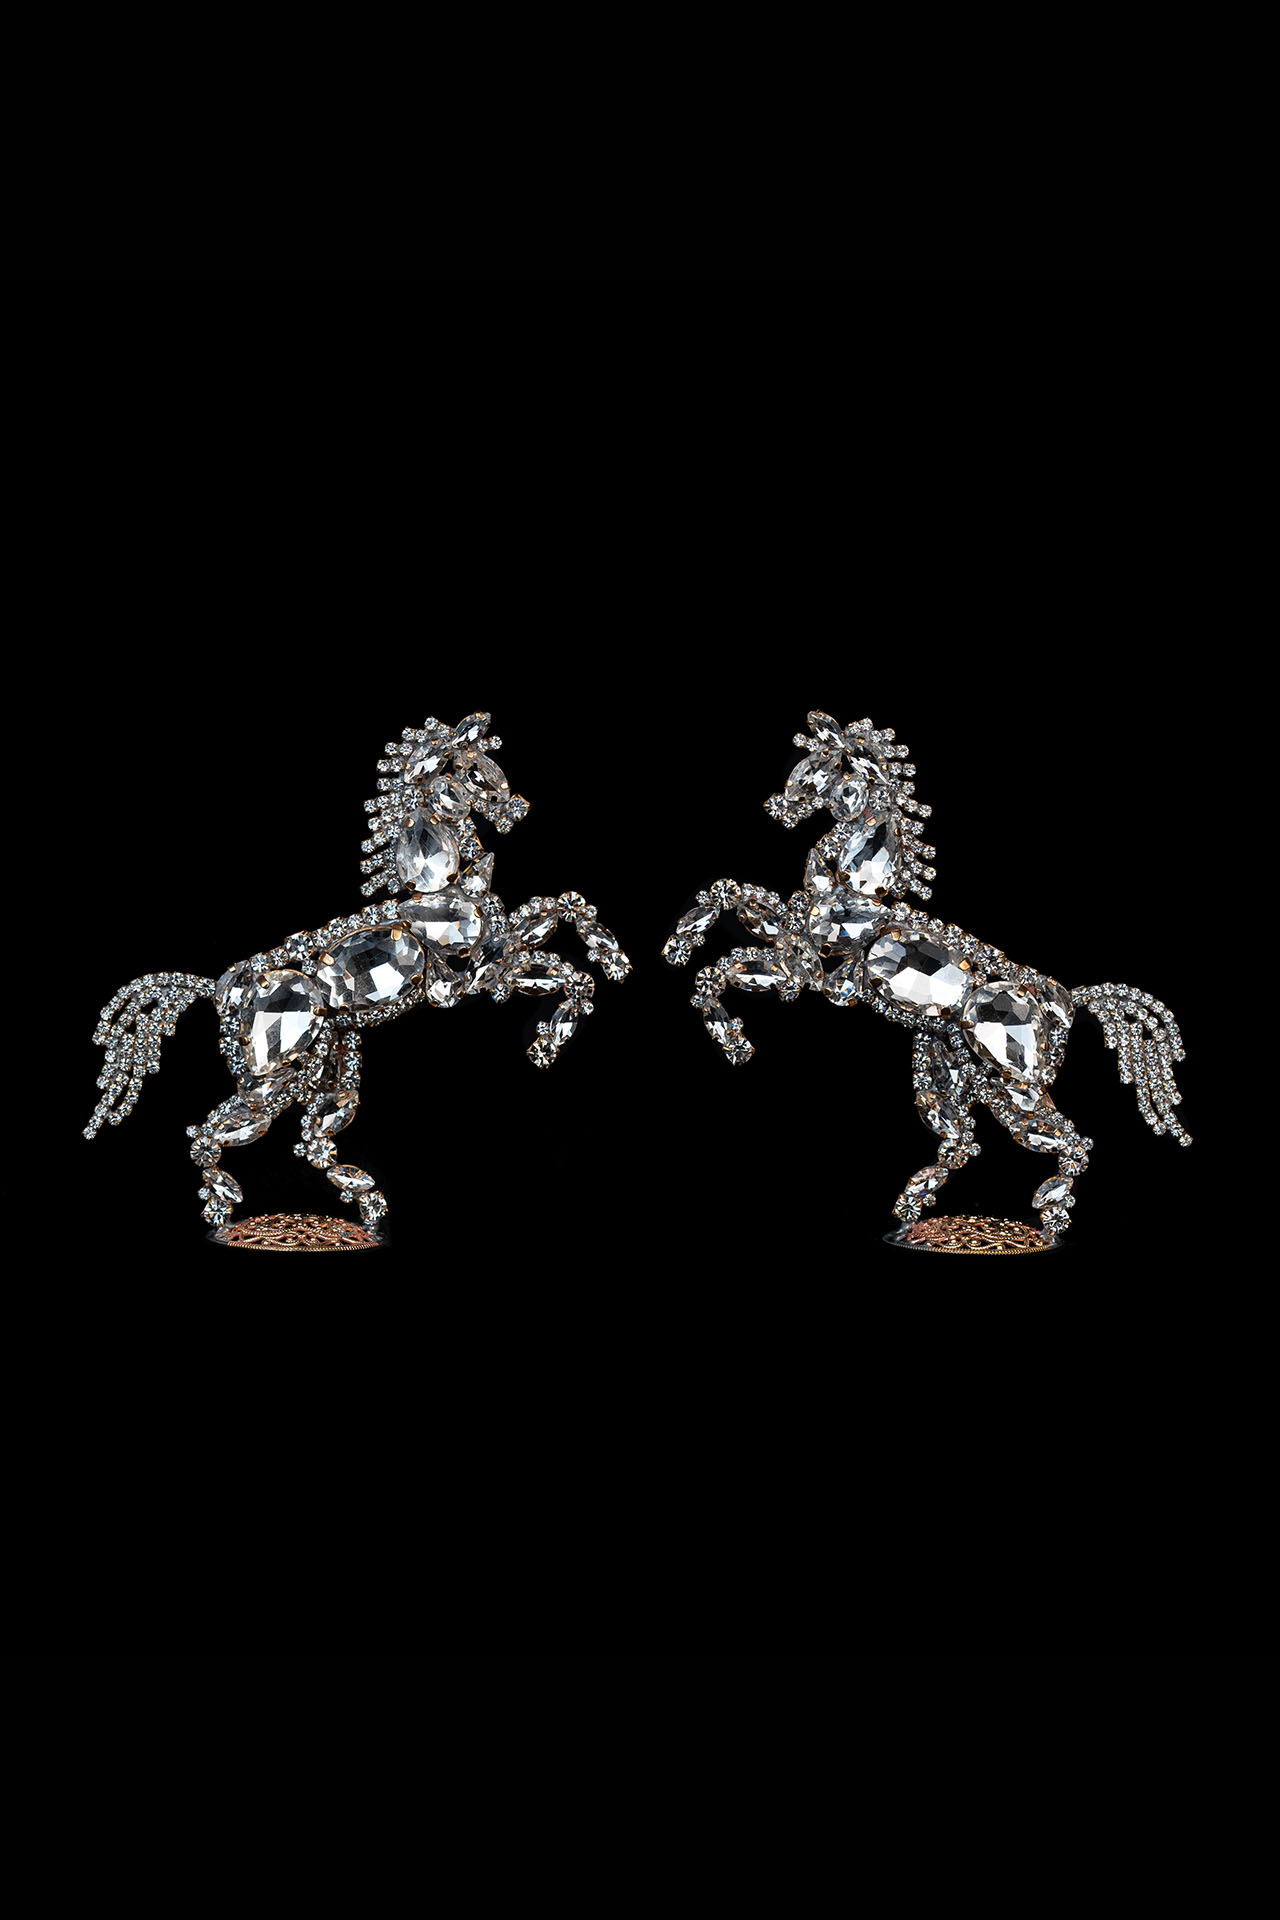 Horse figurines for home decor made from clear rhinestones